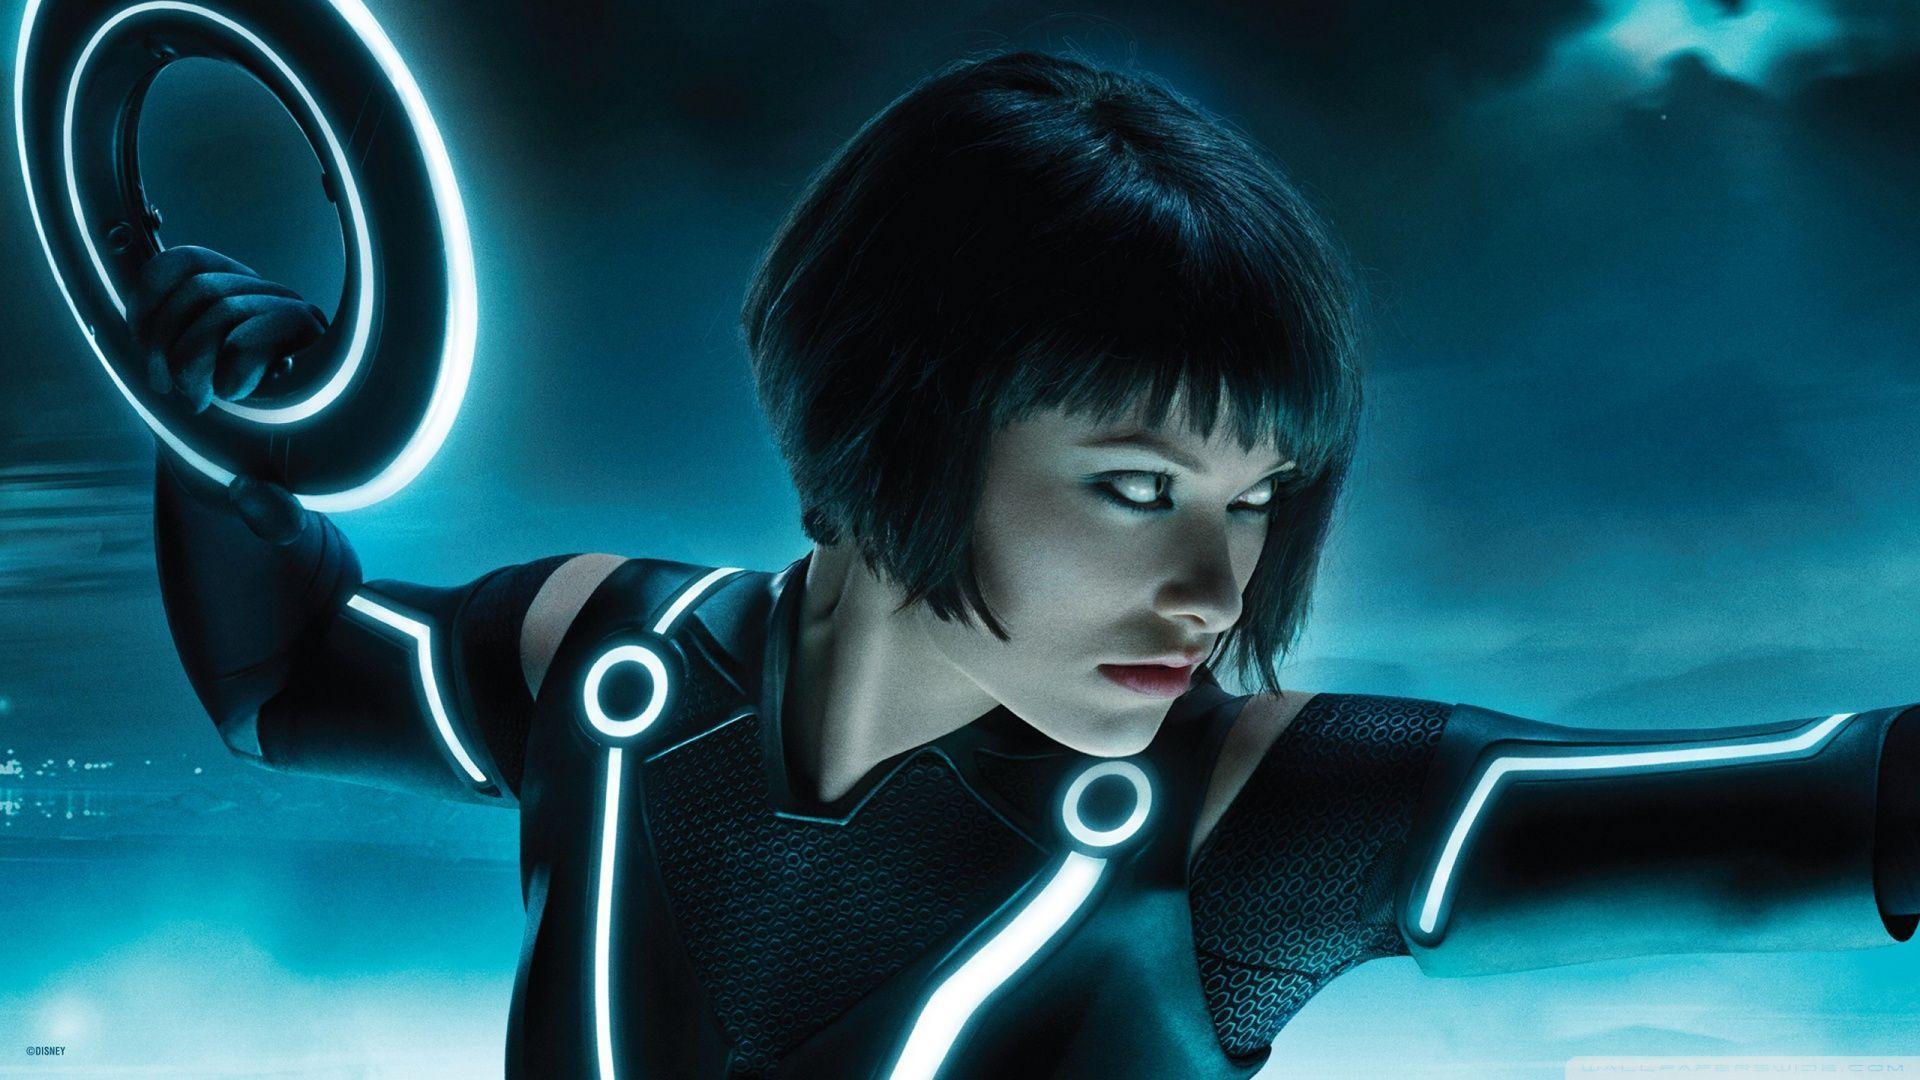 image For > Olivia Wilde Tron Wallpaper 1080p